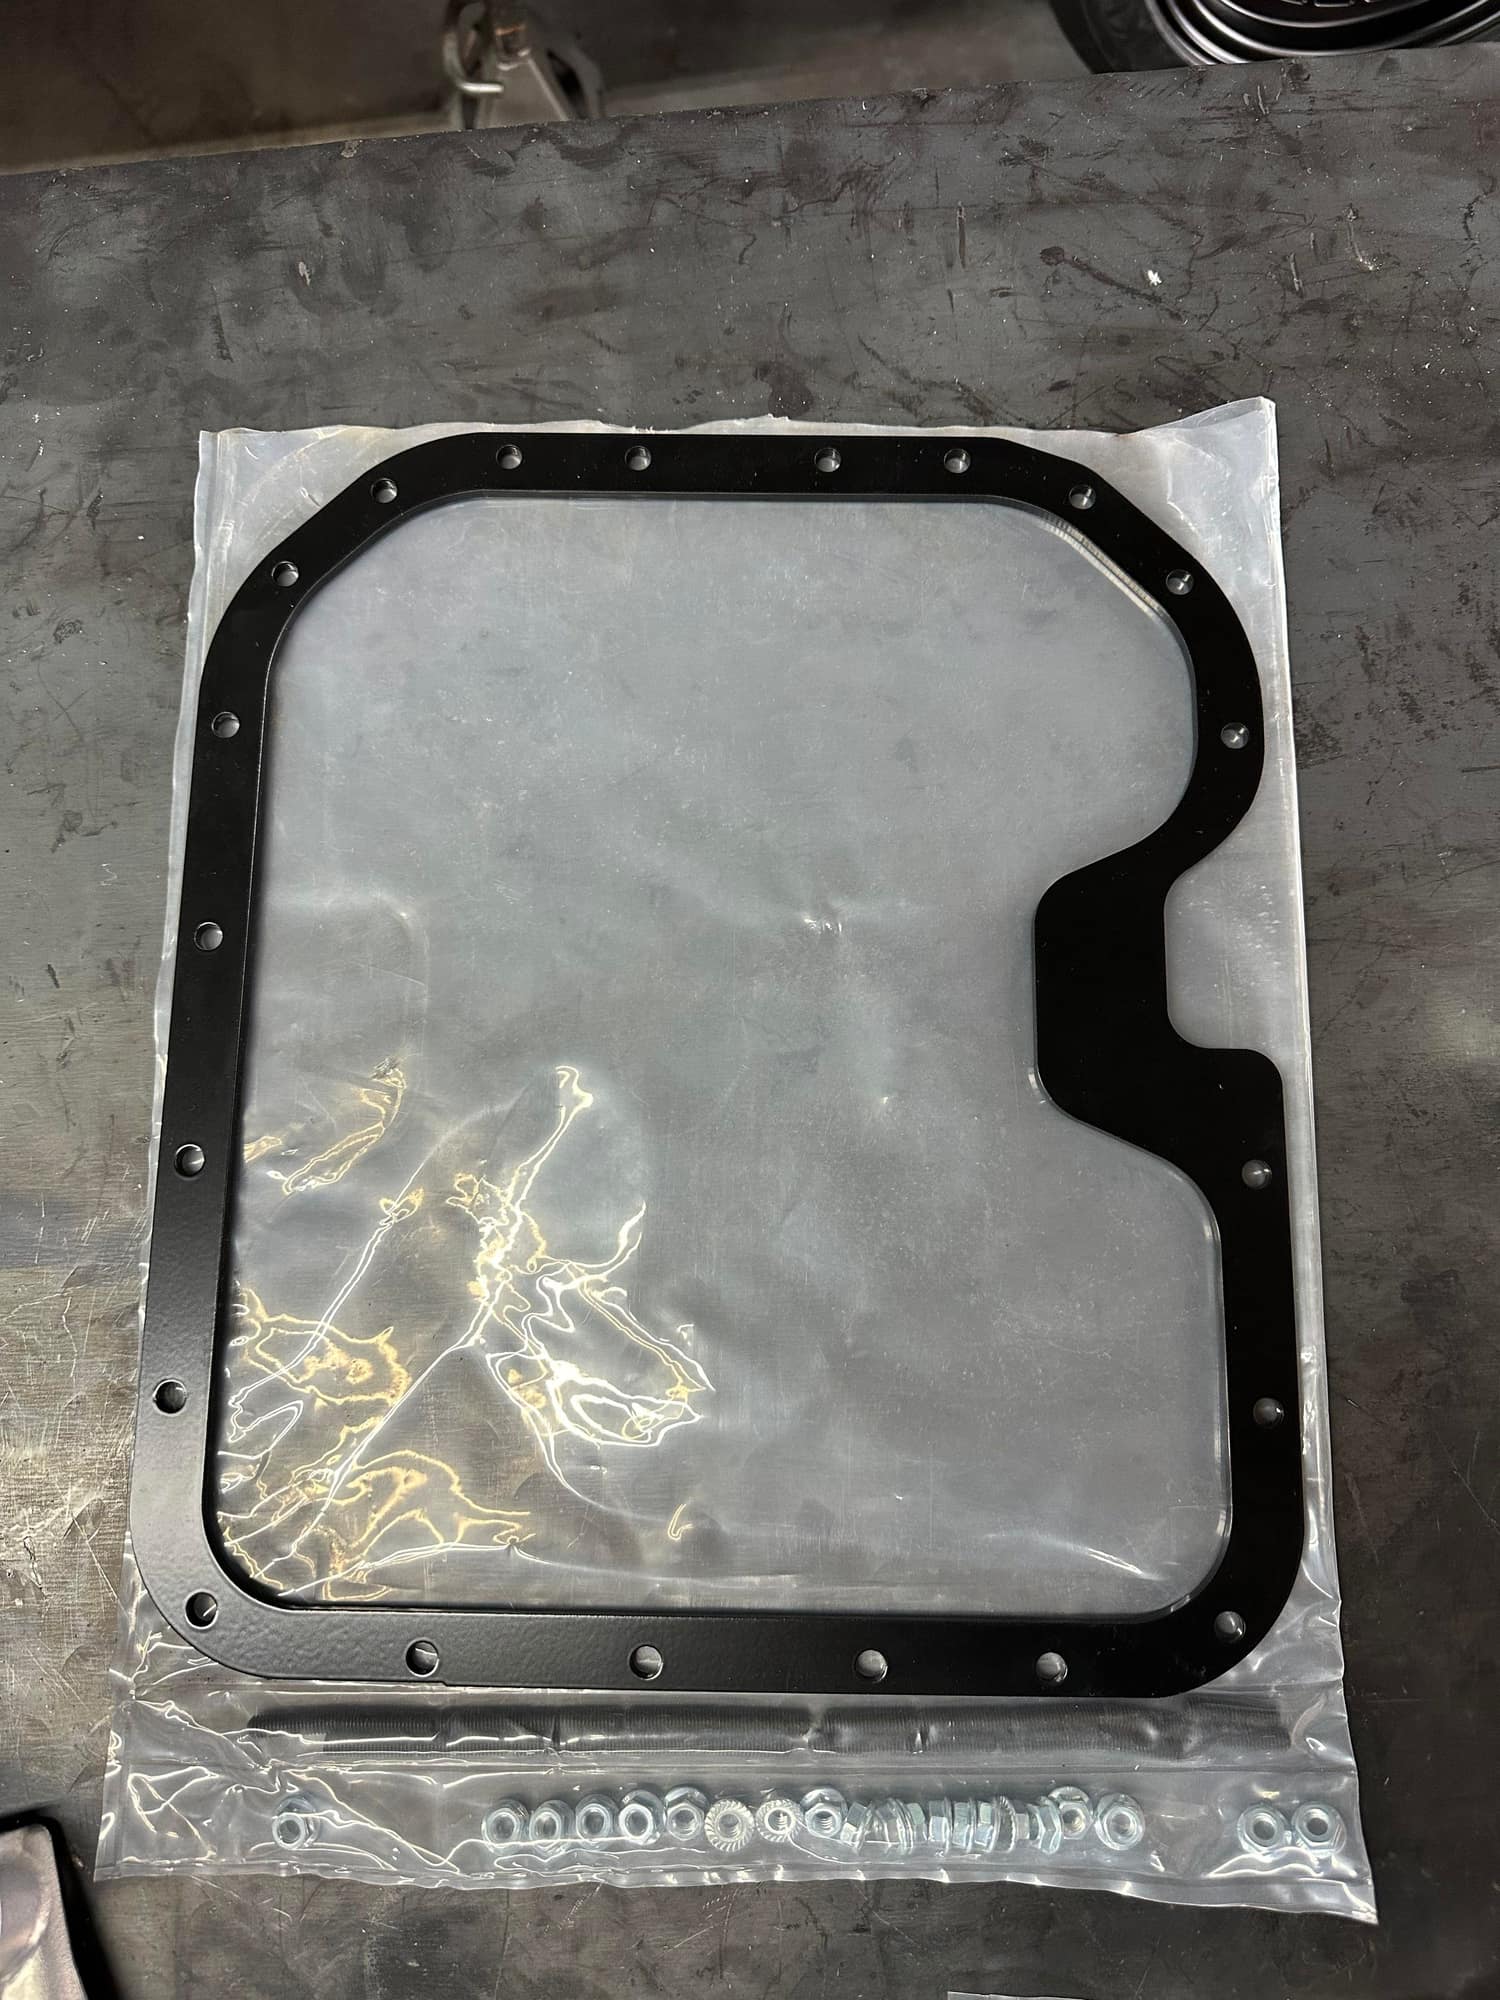 Engine - Internals - Elite Rotary Oil Pan Brace (Powder Coated Black) - New - 1986 to 1991 Mazda RX-7 - Cleveland, OH 44144, United States